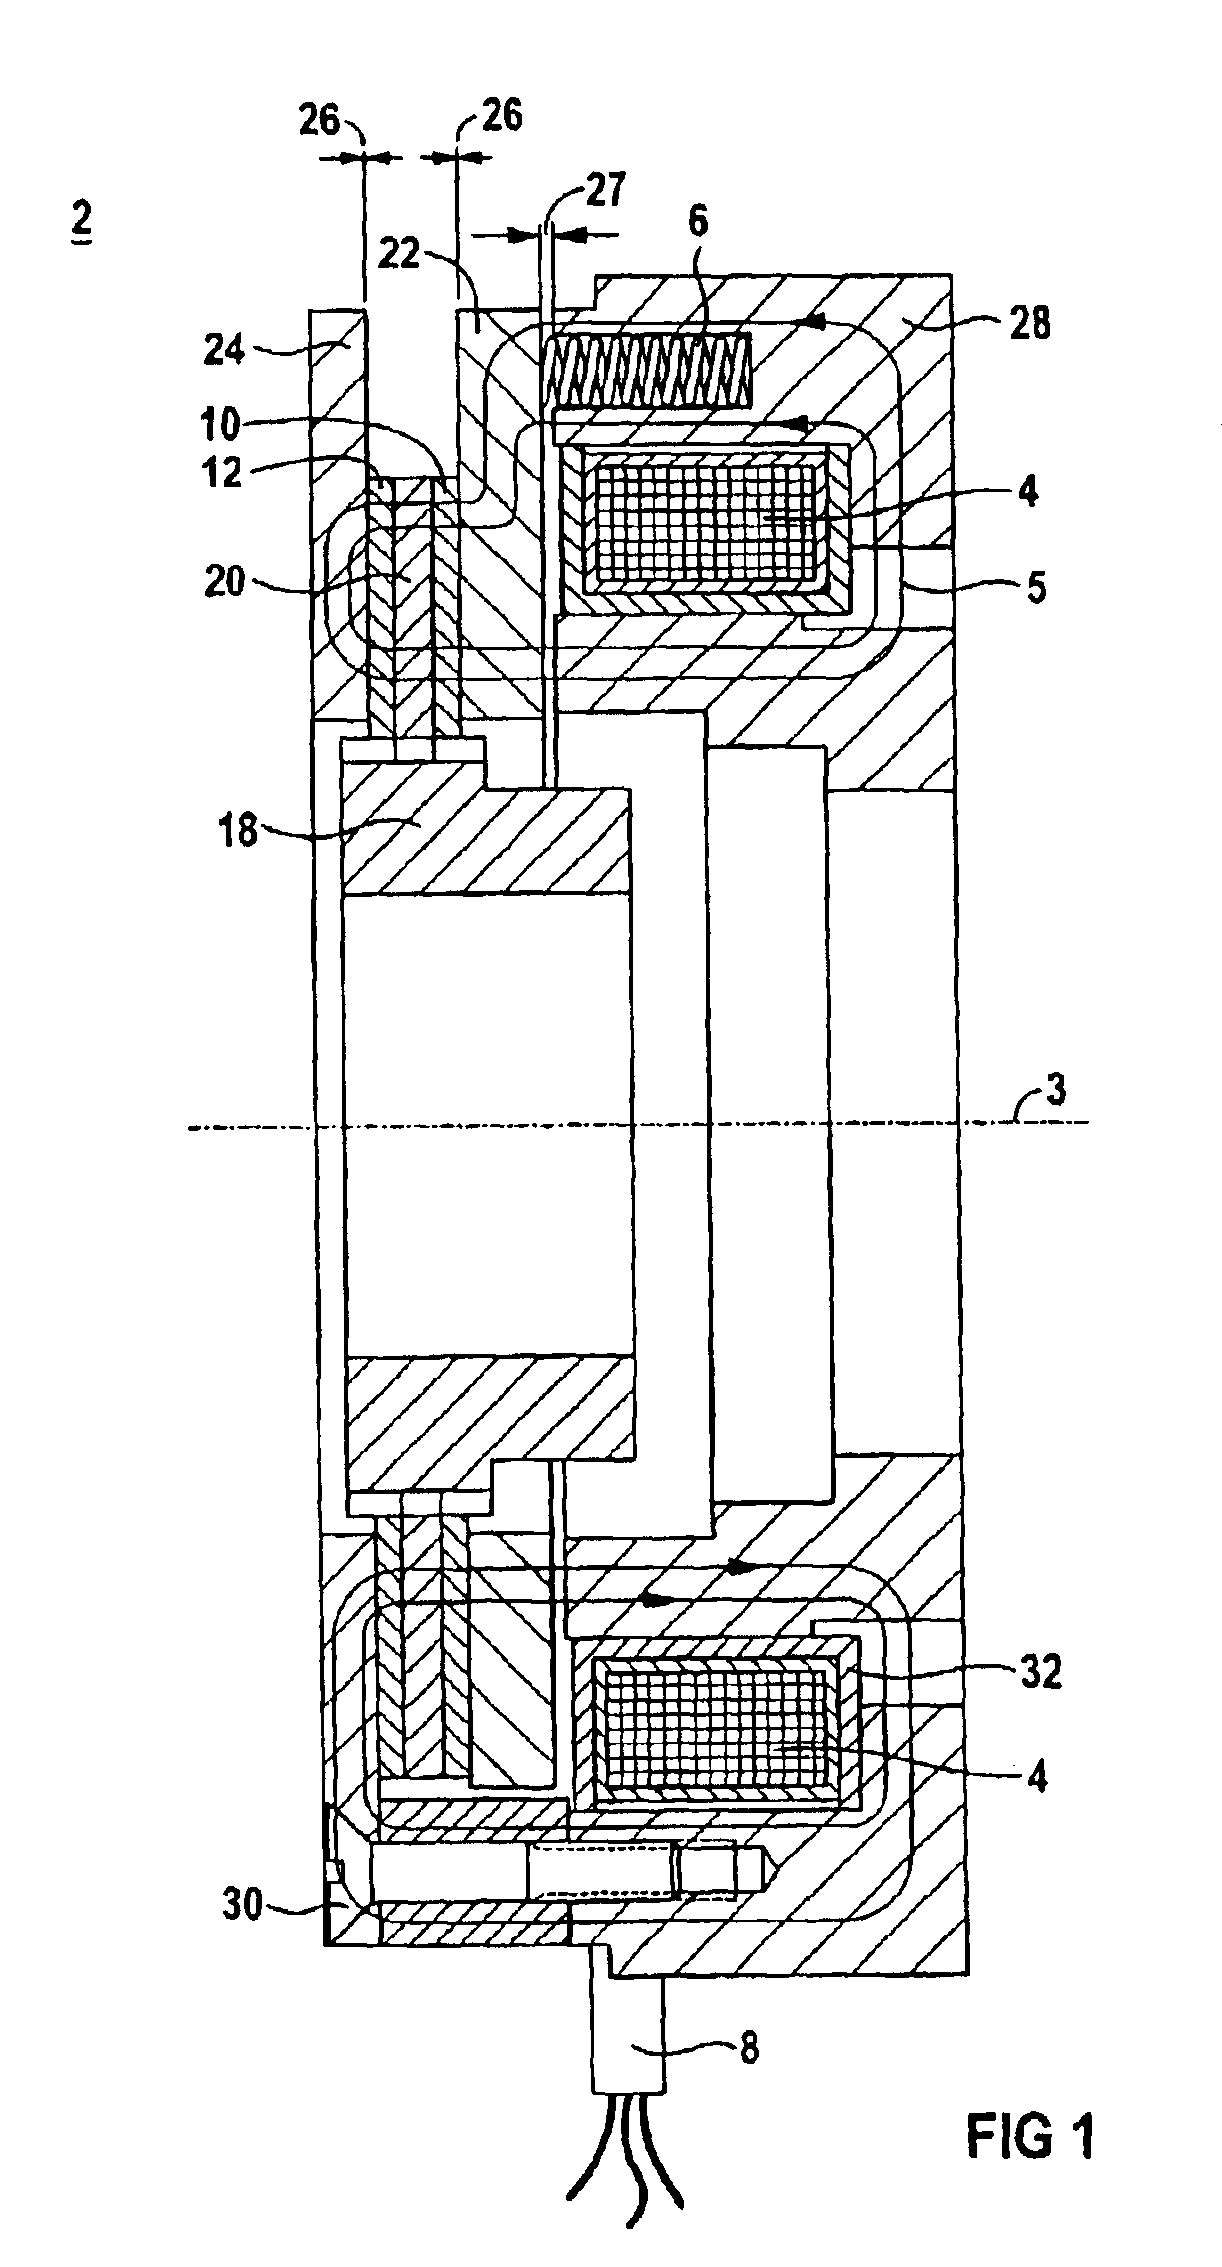 Method for detecting wear in a brake or a clutch